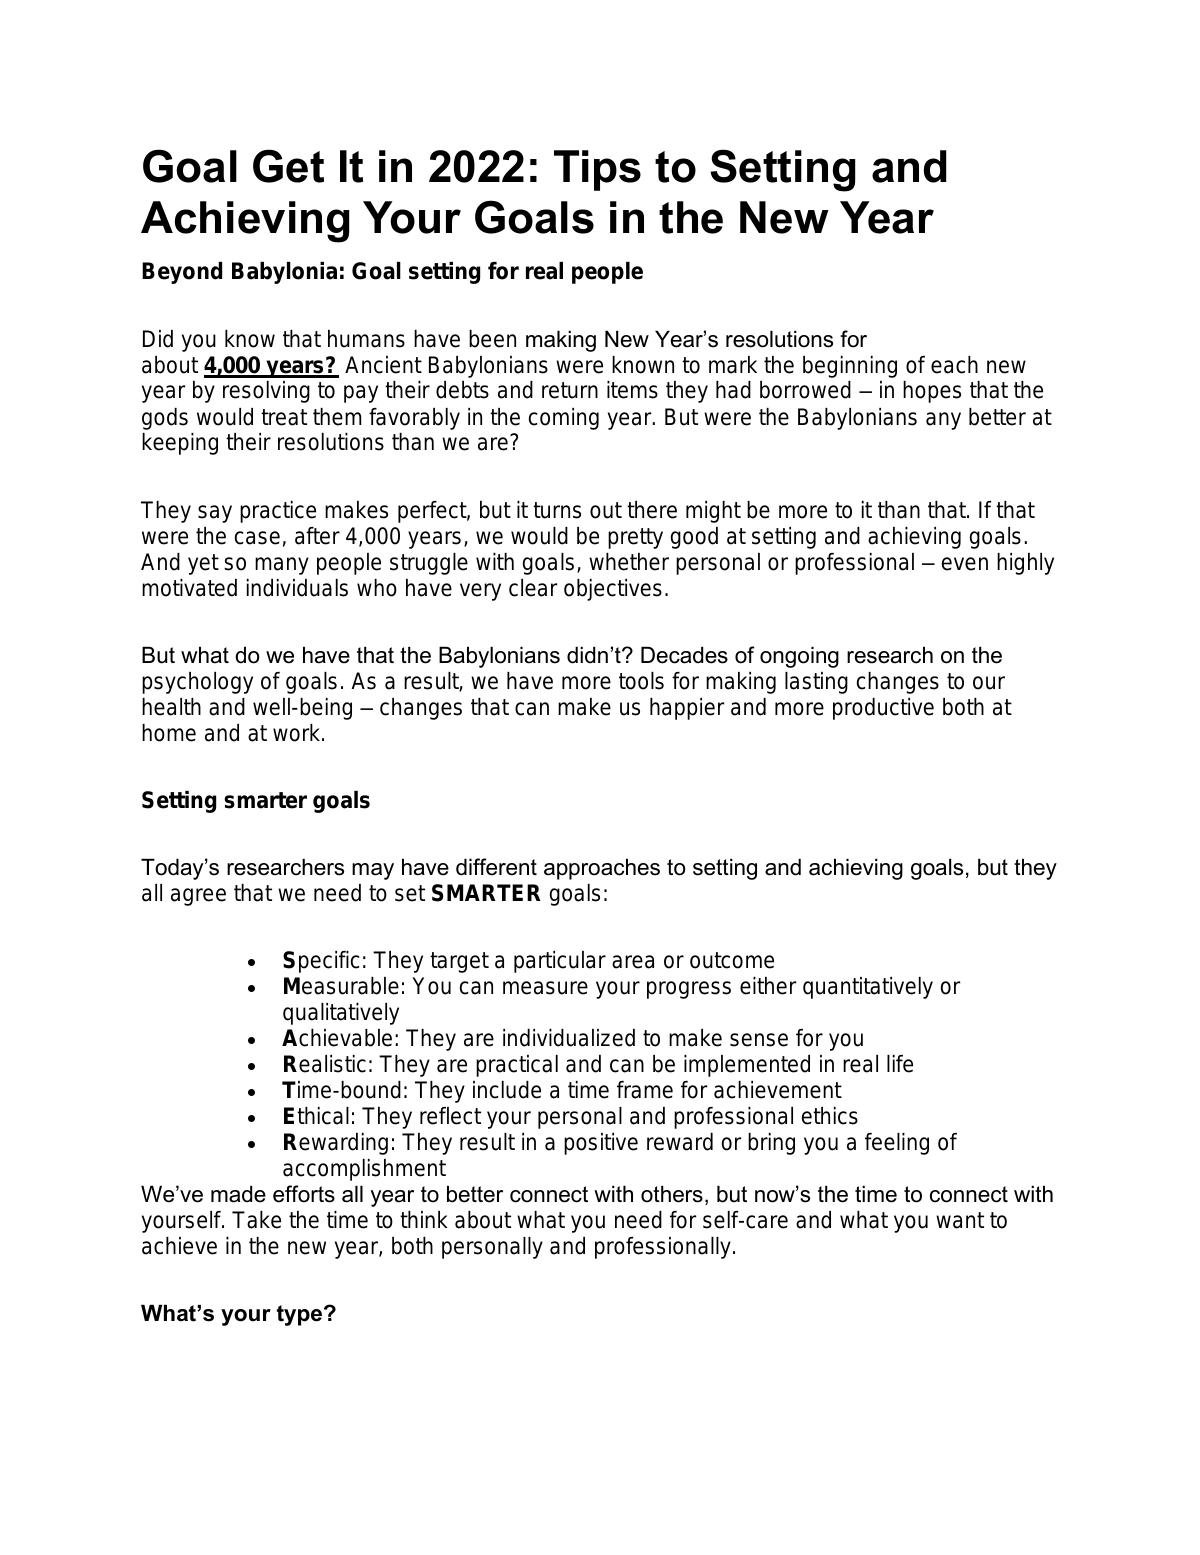 Goal Get It in 2022: Tips to Setting and Achieving Your Goals in the New Year